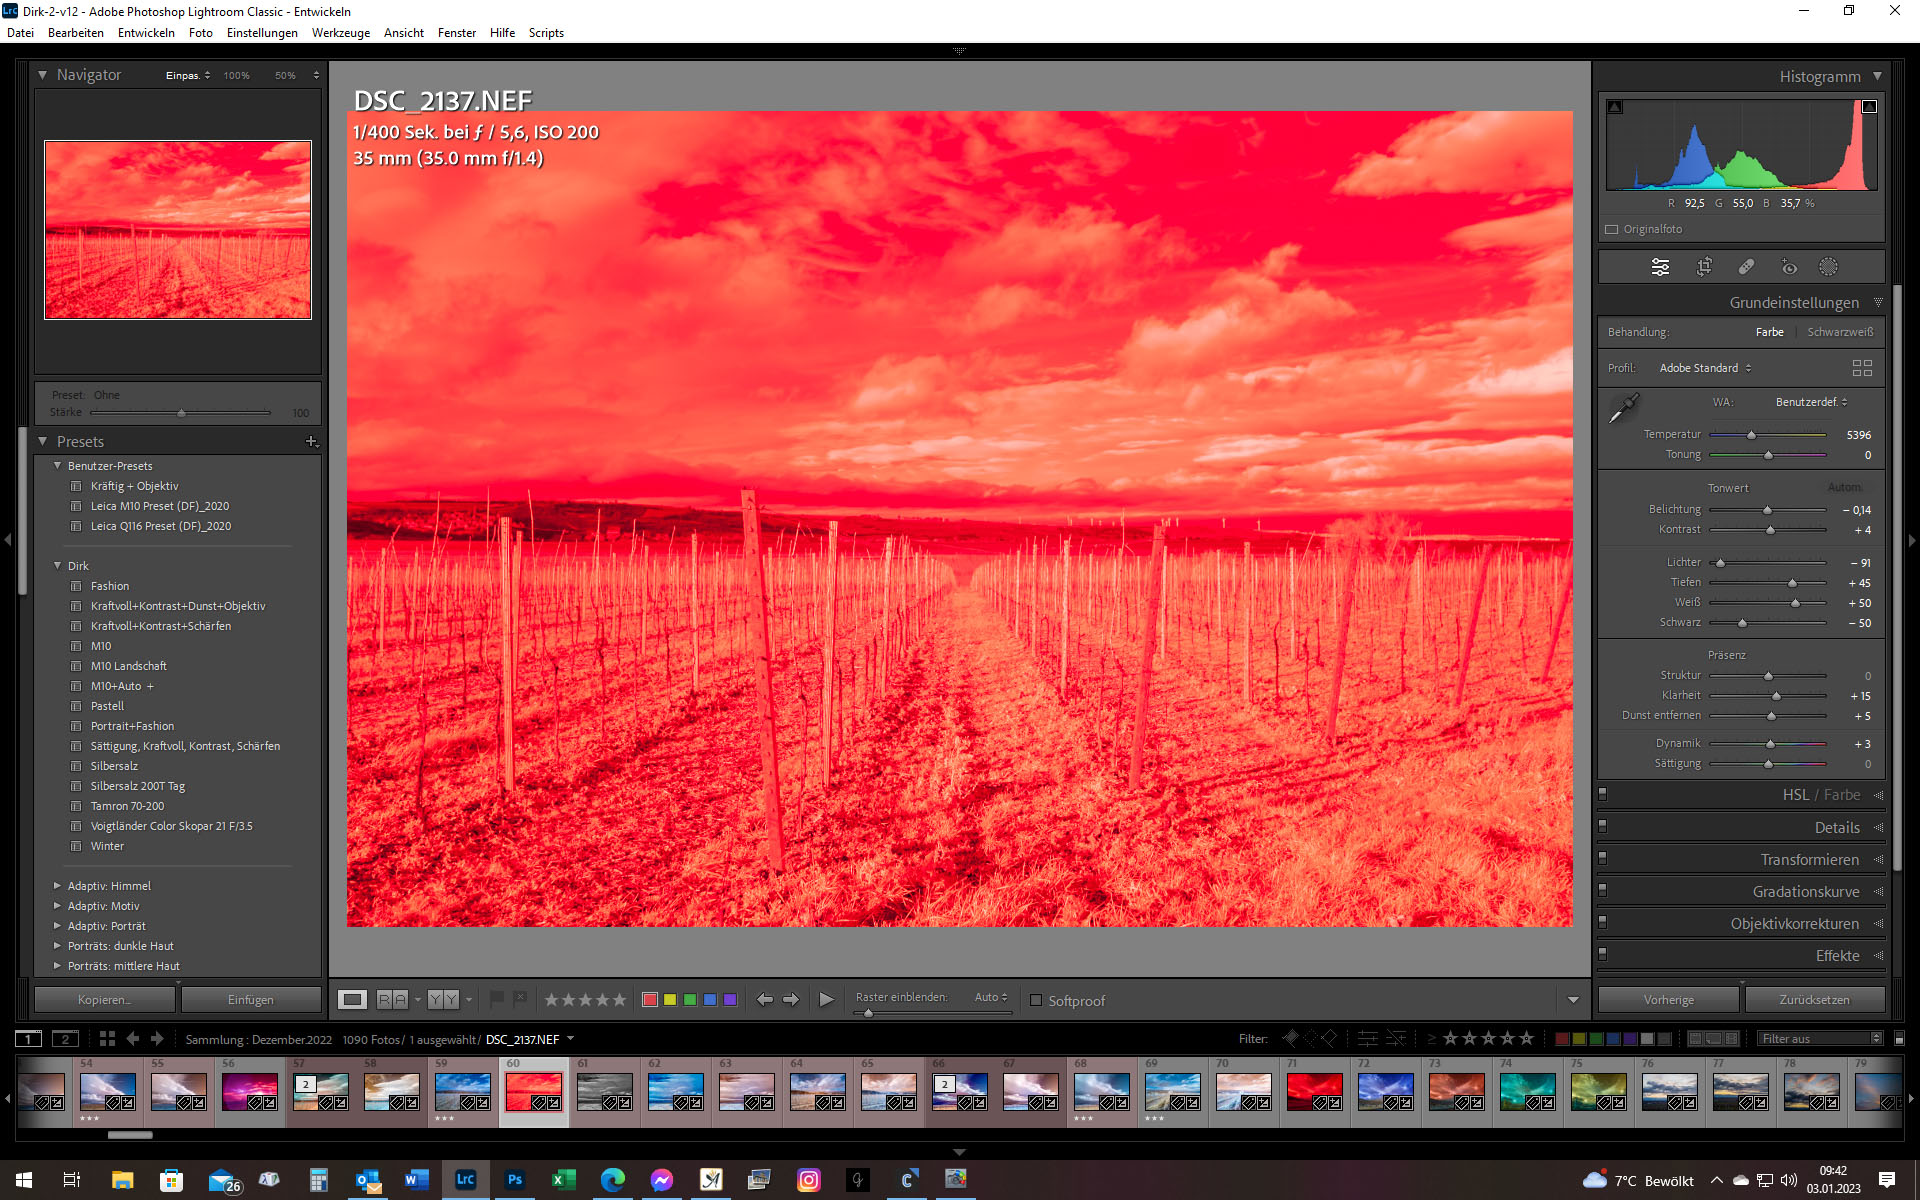 The Adobe Lightroom view after image import